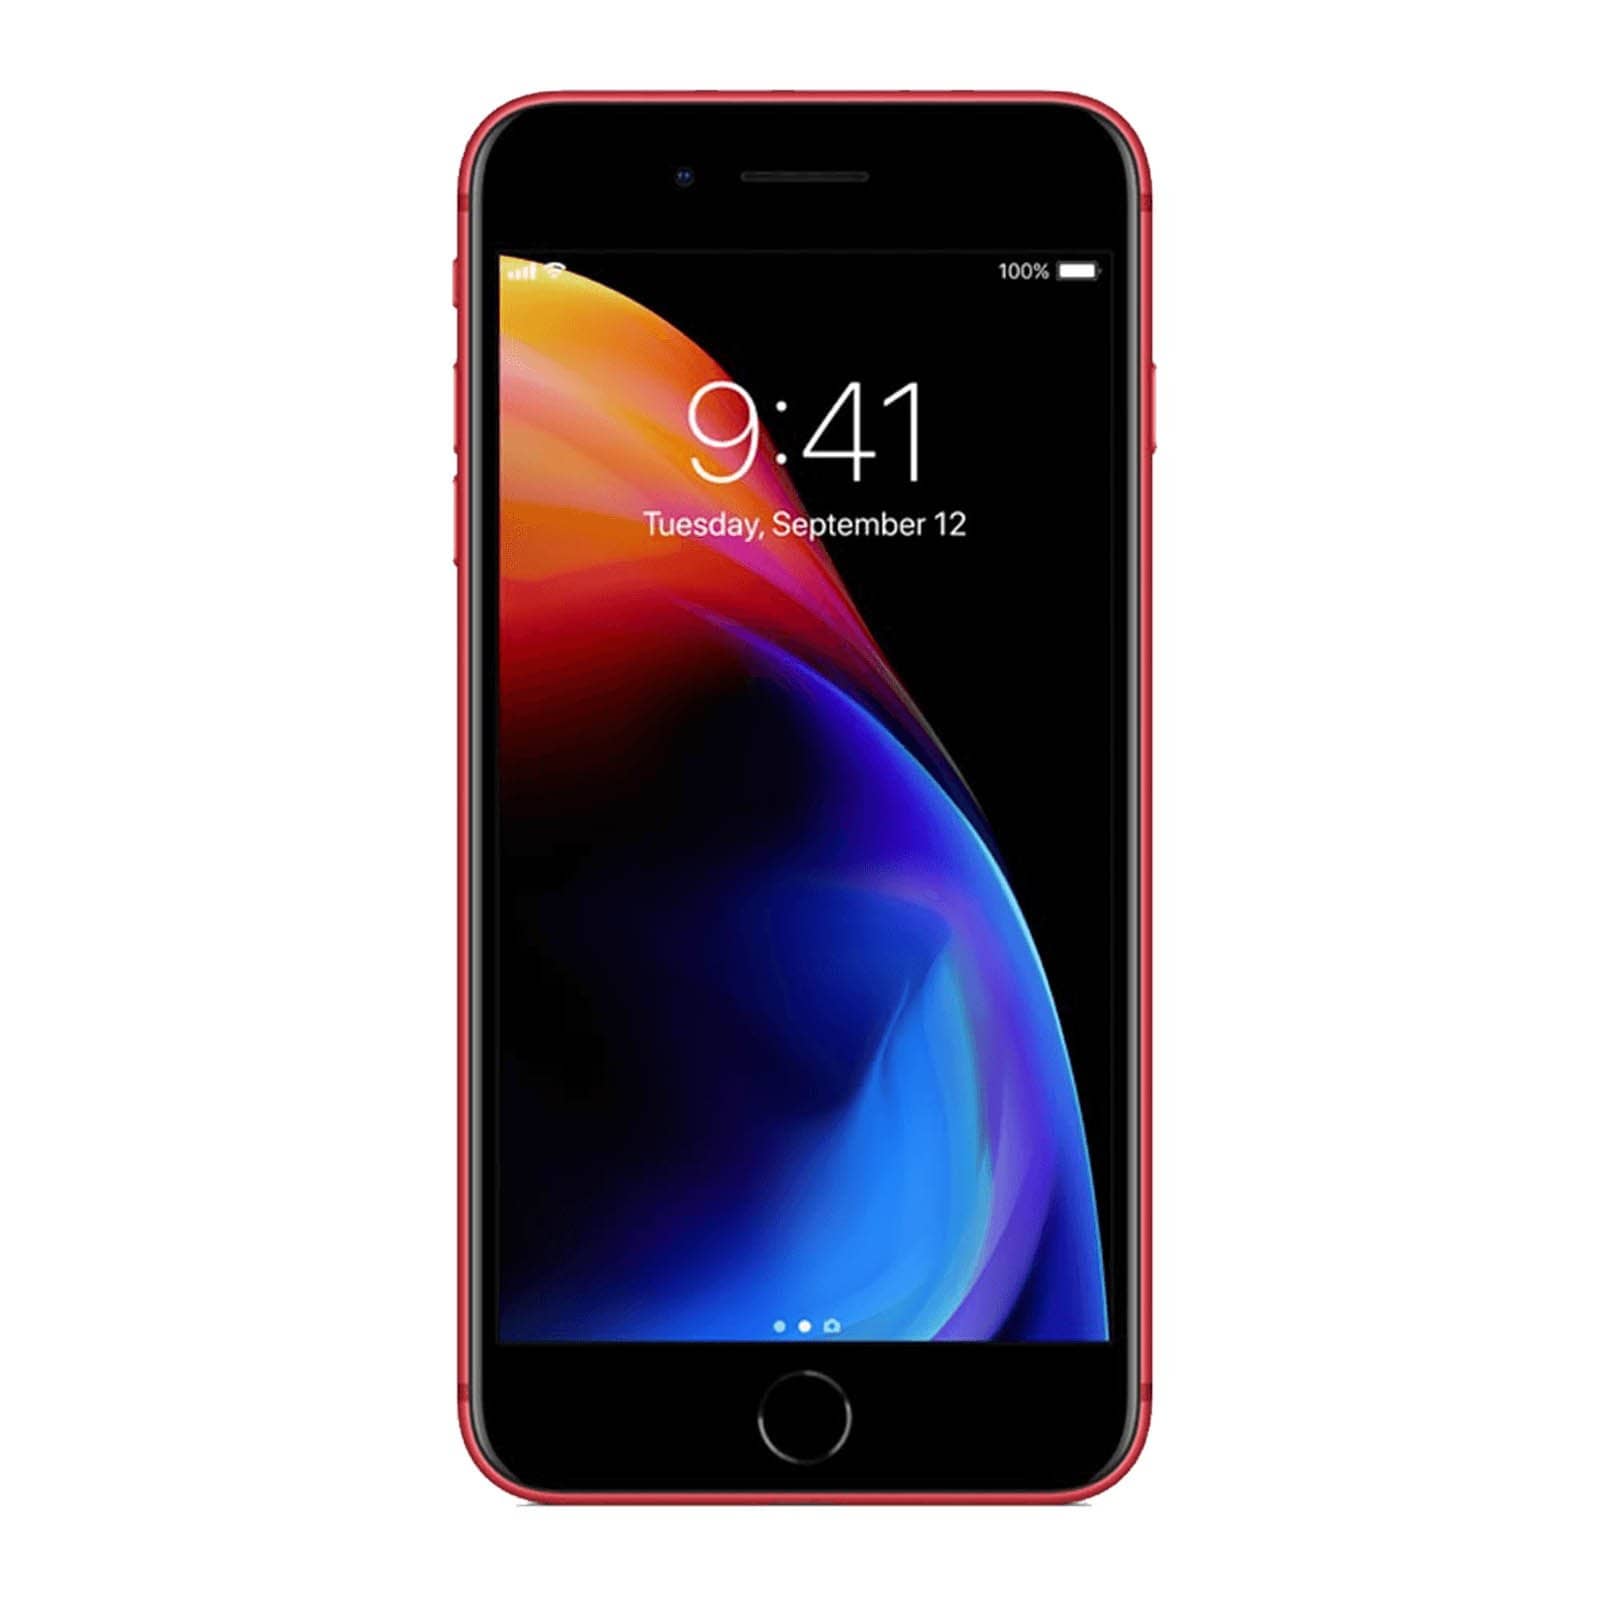 Apple iPhone 8 64GB Product Red Very Good - Unlocked